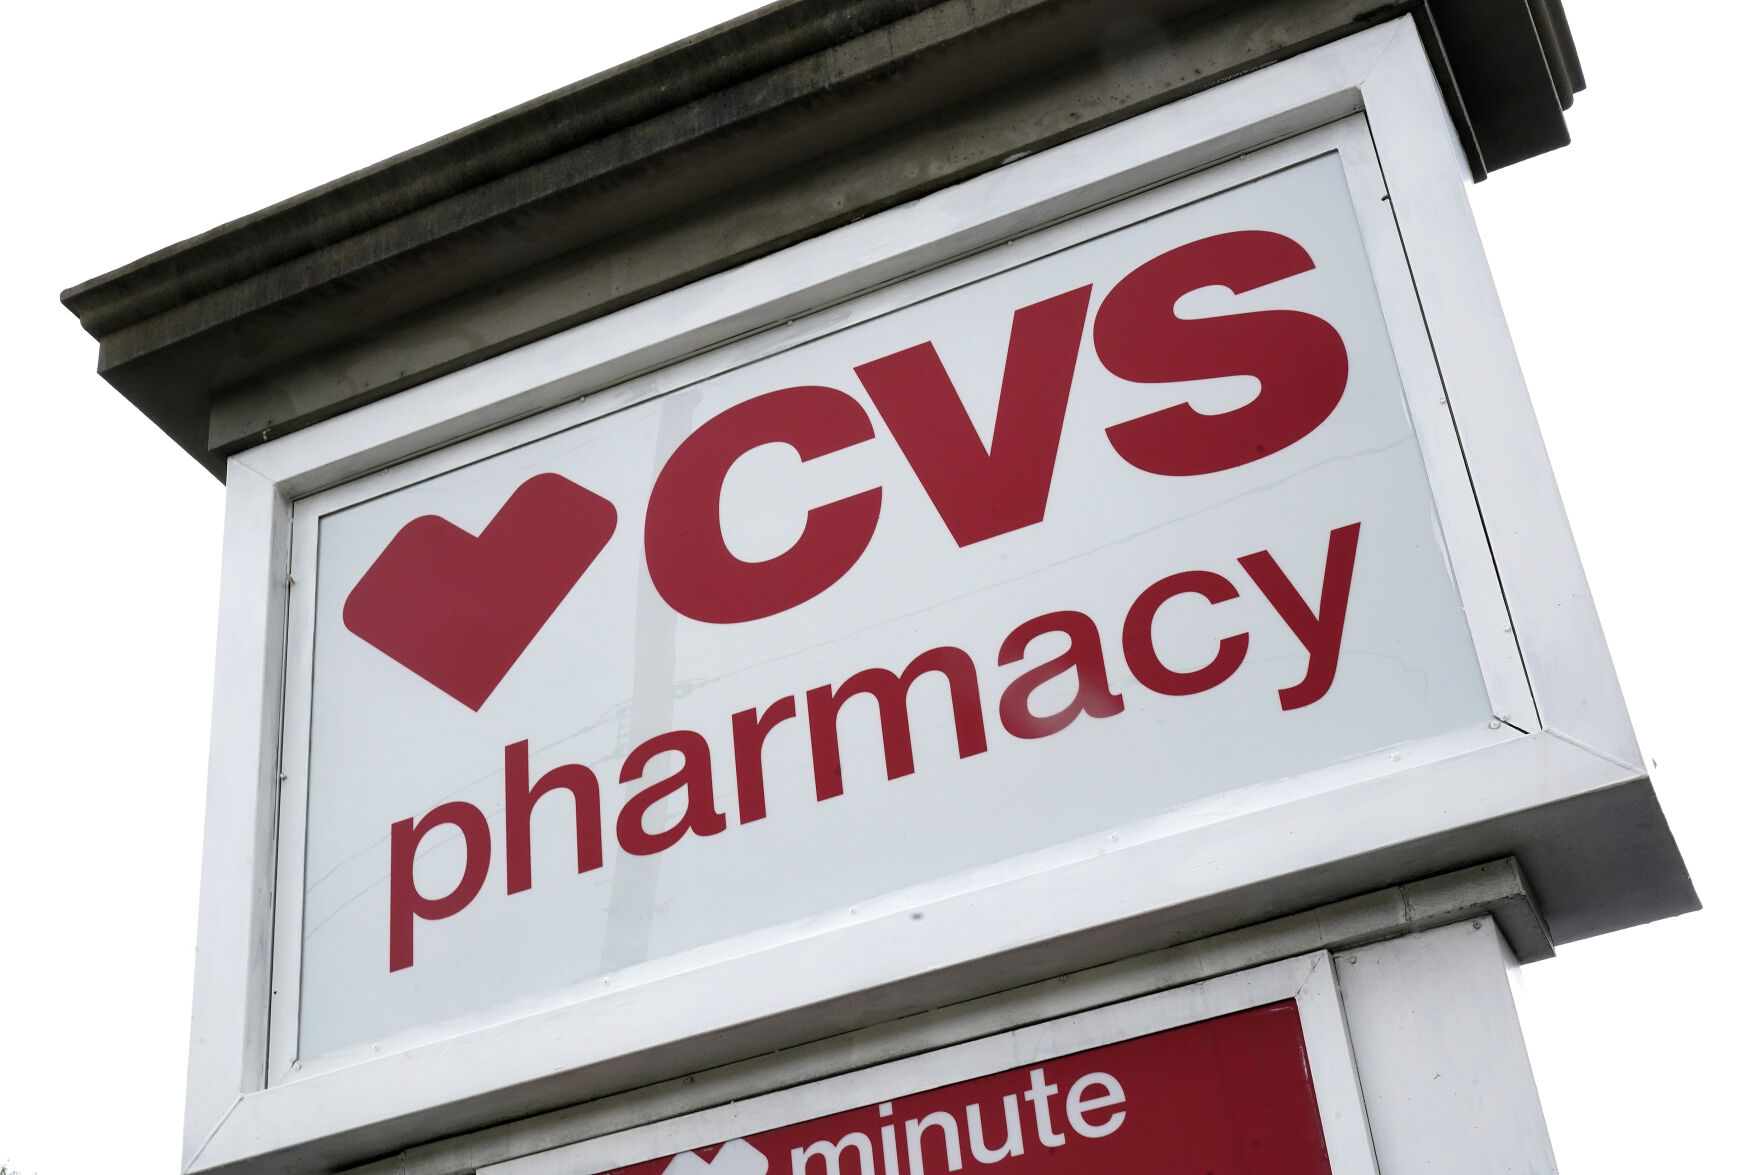 <p>A CVS Pharmacy is shown in Mount Lebanon, Pa., on Monday May 3, 2021. On Wednesday, Nov. 2, 2022, CVS Health said it has agreed to pay about $5 billion to state, local and Native American tribal governments to settle lawsuits over the toll of opioids. CVS is not admitting wrongdoing and the company would make the payments over a decade. (AP Photo/Gene J. Puskar)</p>   PHOTO CREDIT: Gene J. Puskar